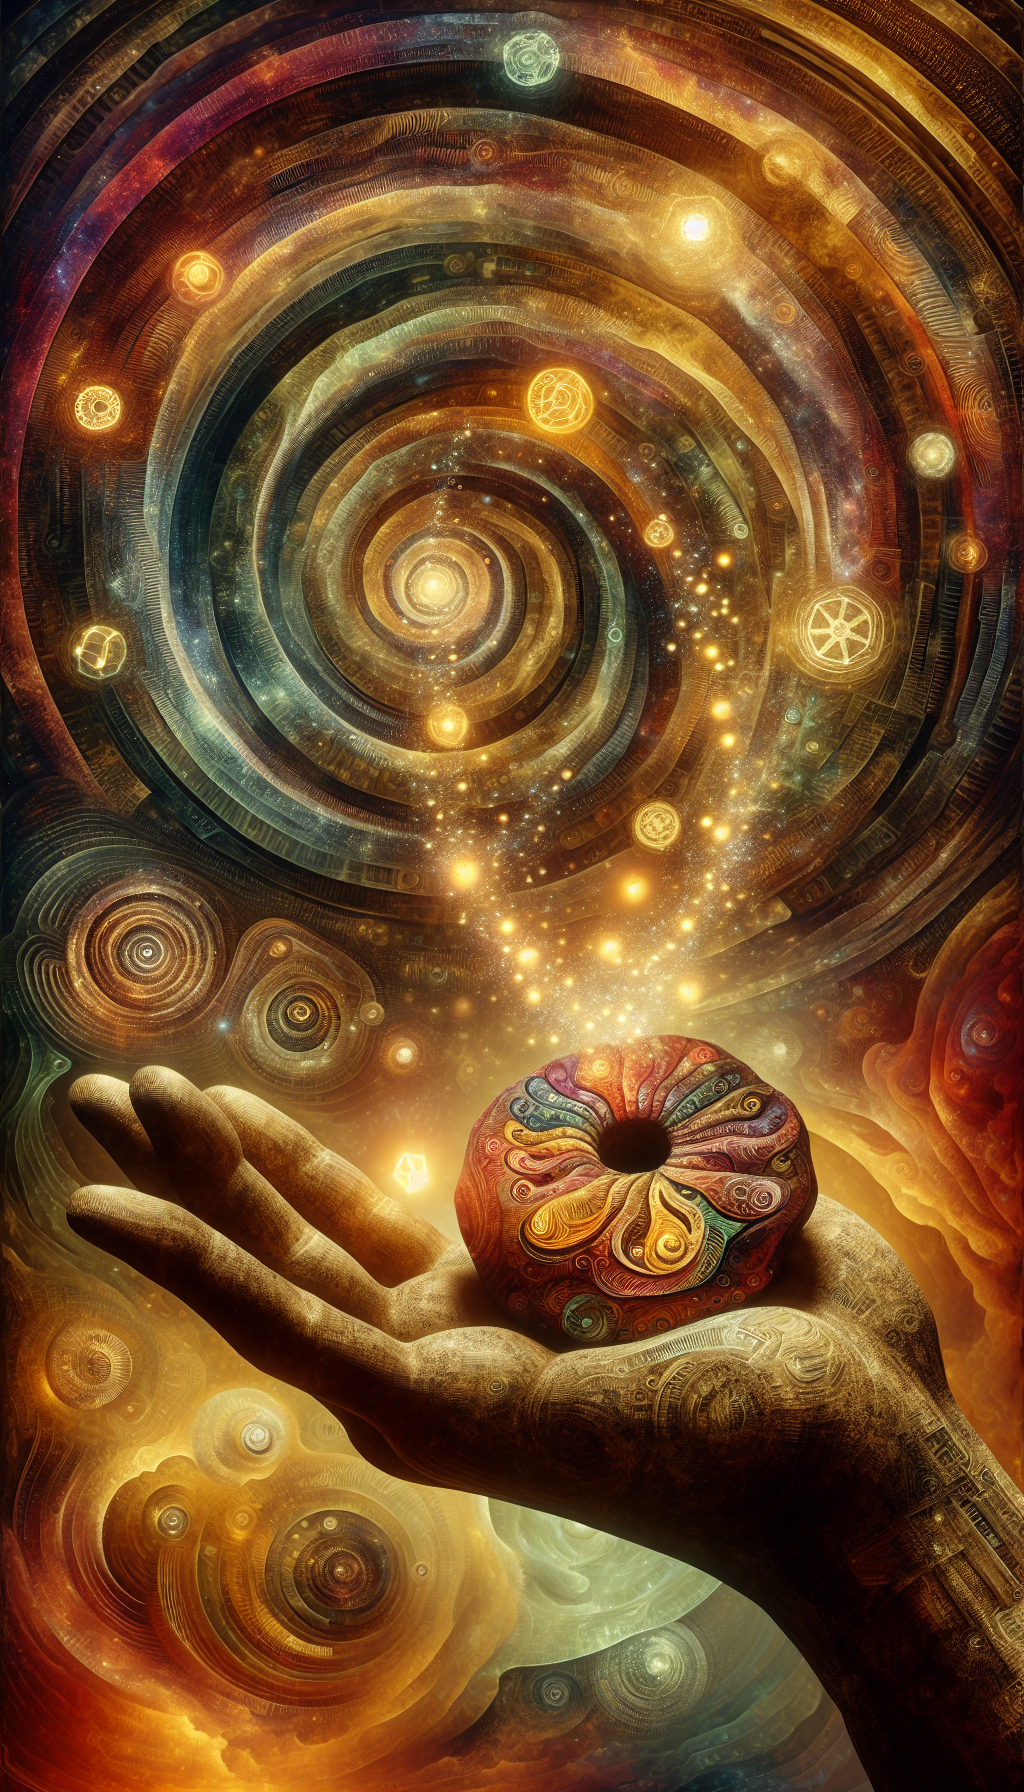 In a harmonious fusion of styles, the illustration depicts an ethereal landscape with cascading, translucent layers representing time. At the forefront, a sepia-toned hand cradles a vibrant, intricately carved Indian rock with a central hole, from which a galaxy of miniature artifacts spirals out, each glowing subtly, symbolizing their evolution from mundane tools to mystical talismans.